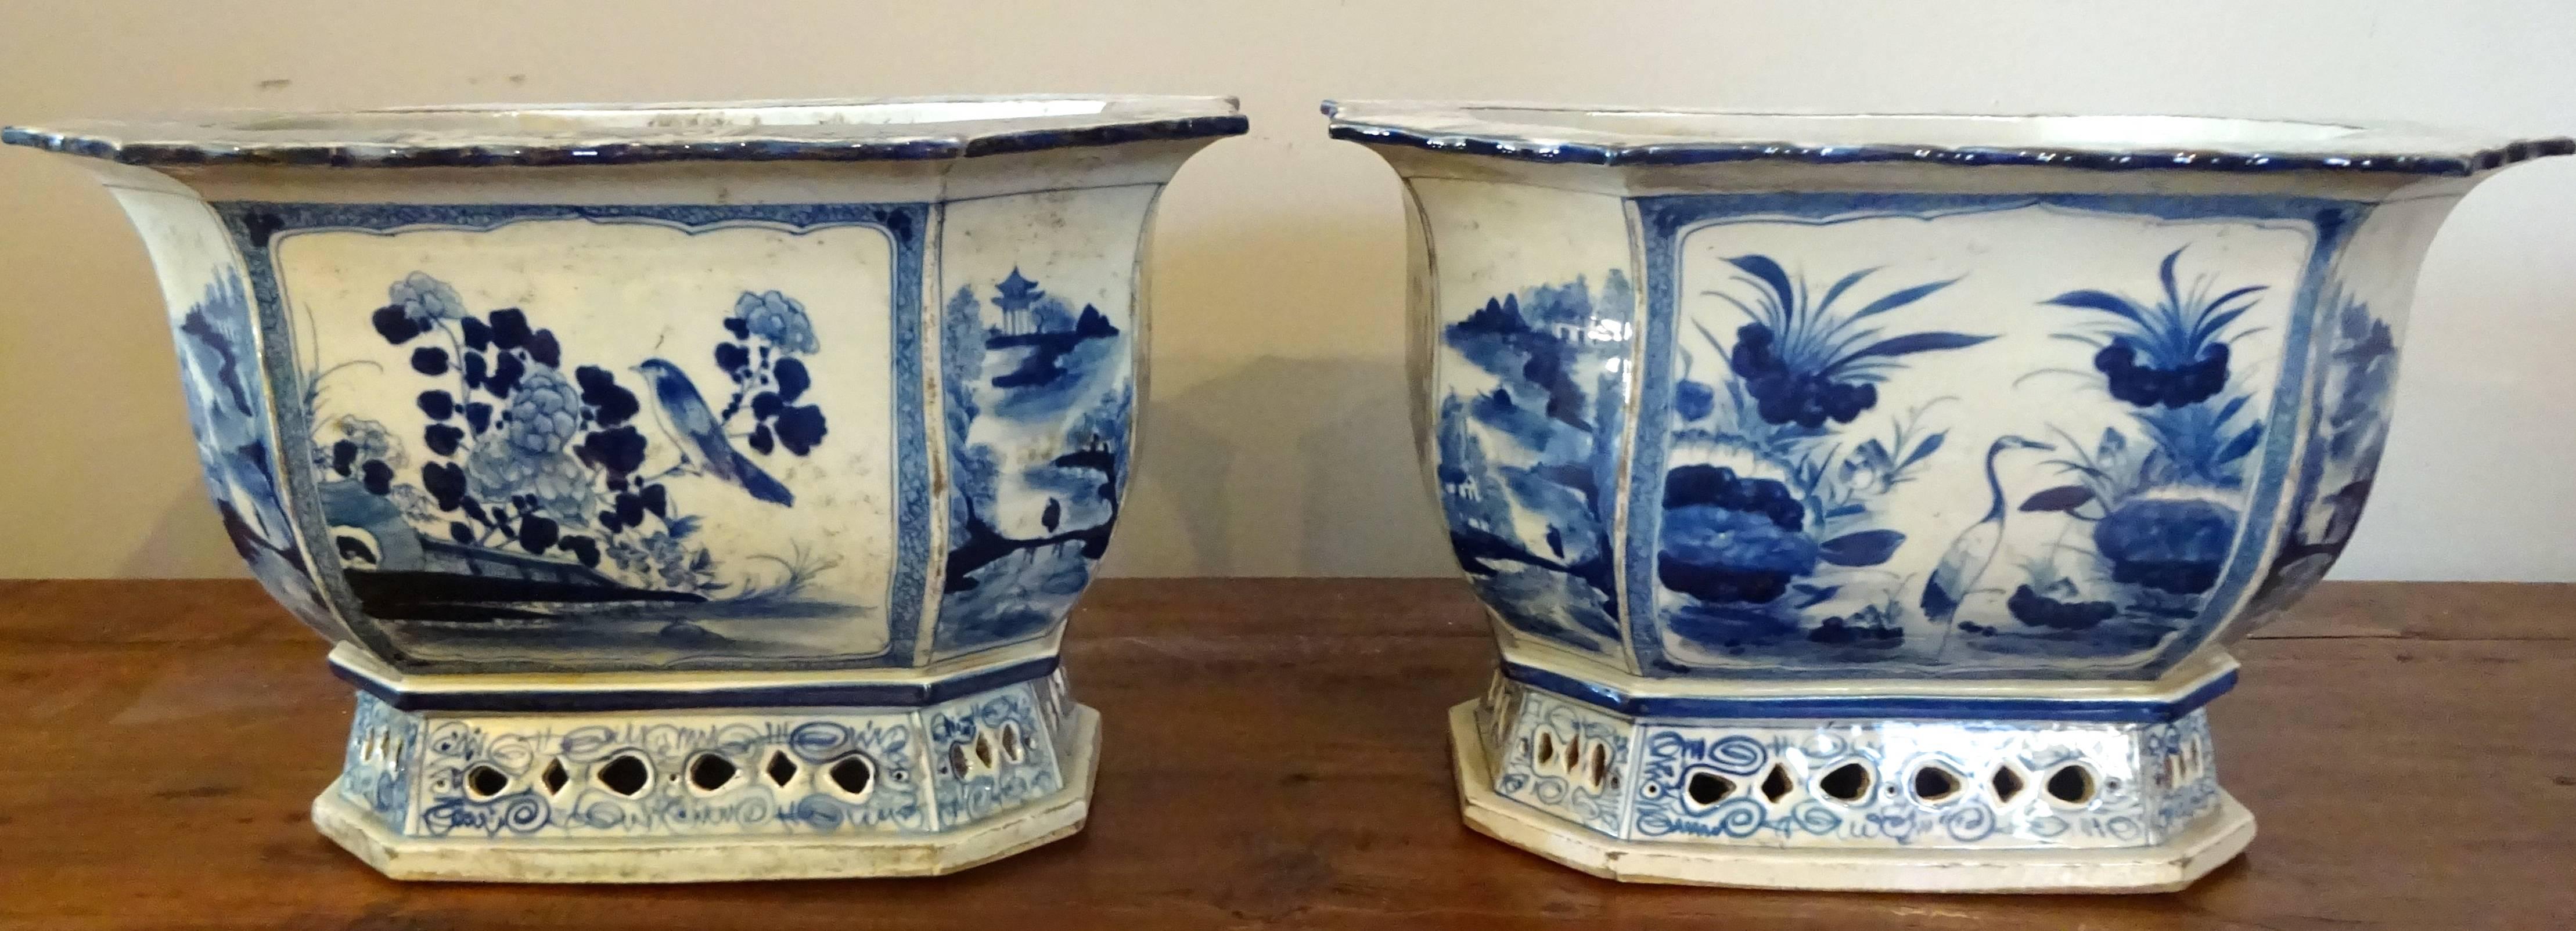 Chinese Export Pair of Chinese Blue and White Porcelain Jardinieres